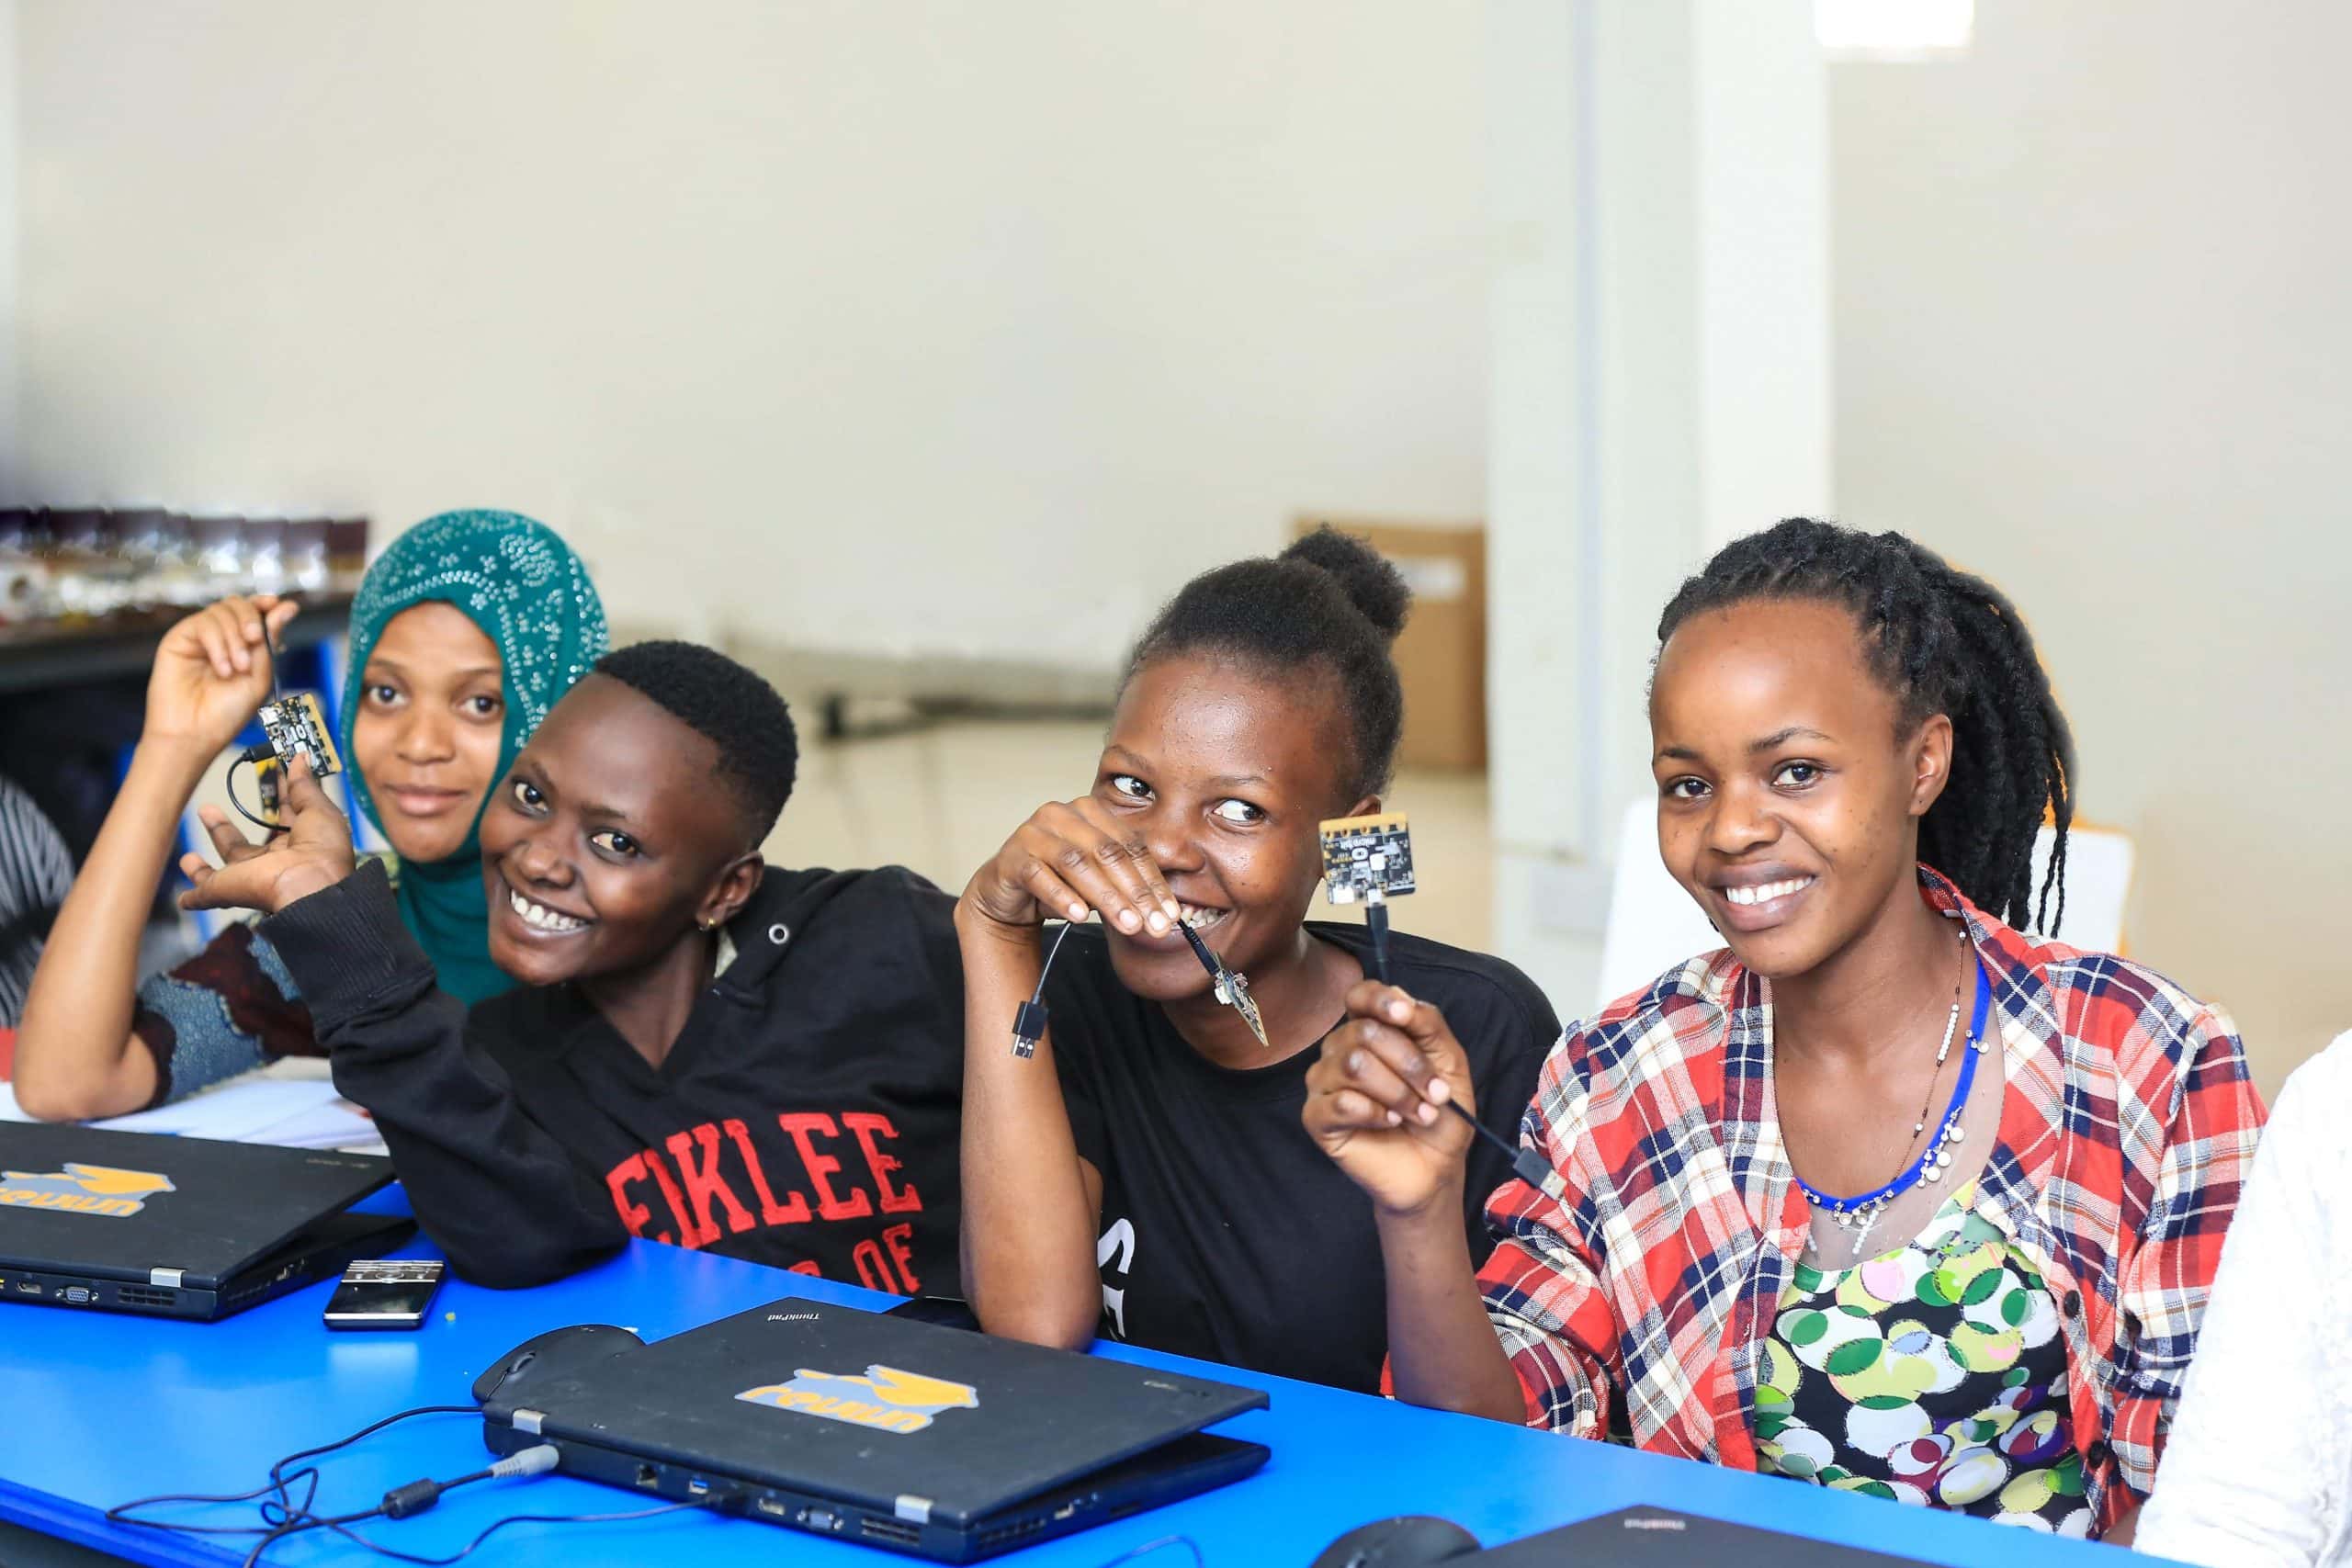 four women pose with computer hardware participating in technology skills for women in Uganda